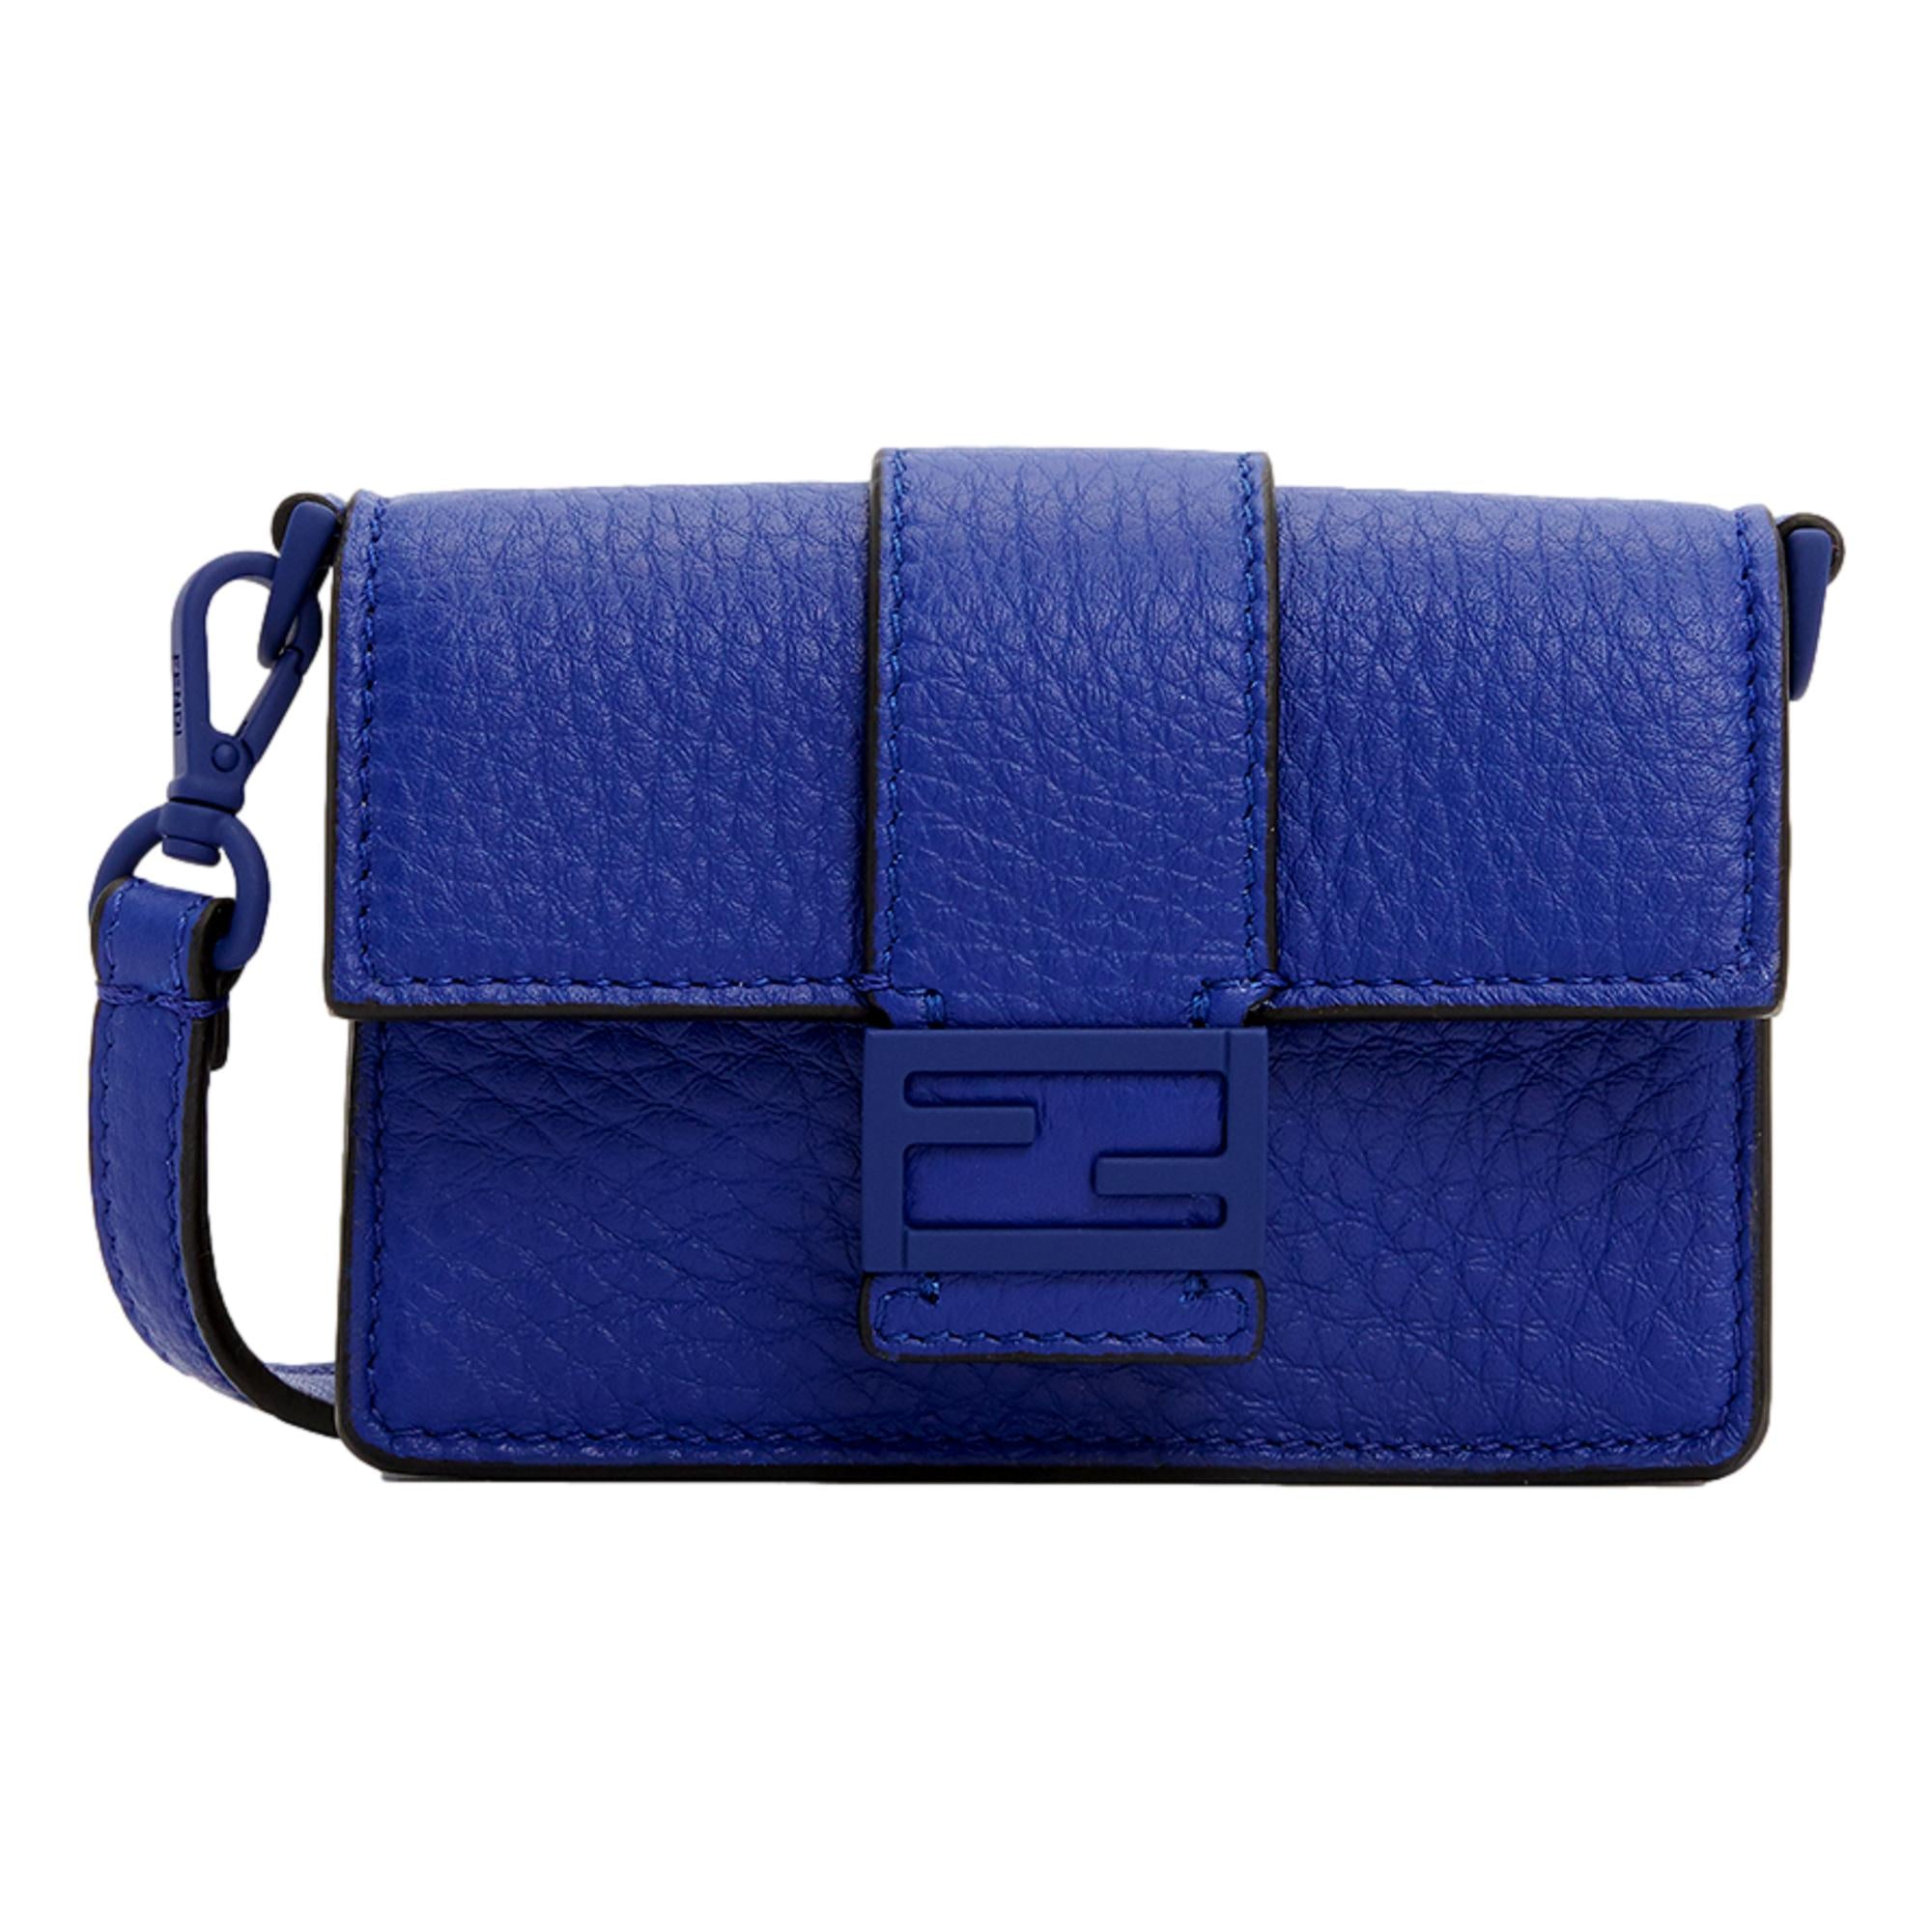 Fendi Micro Baguette Cross Body Neon Blue Leather at_Queen_Bee_of_Beverly_Hills